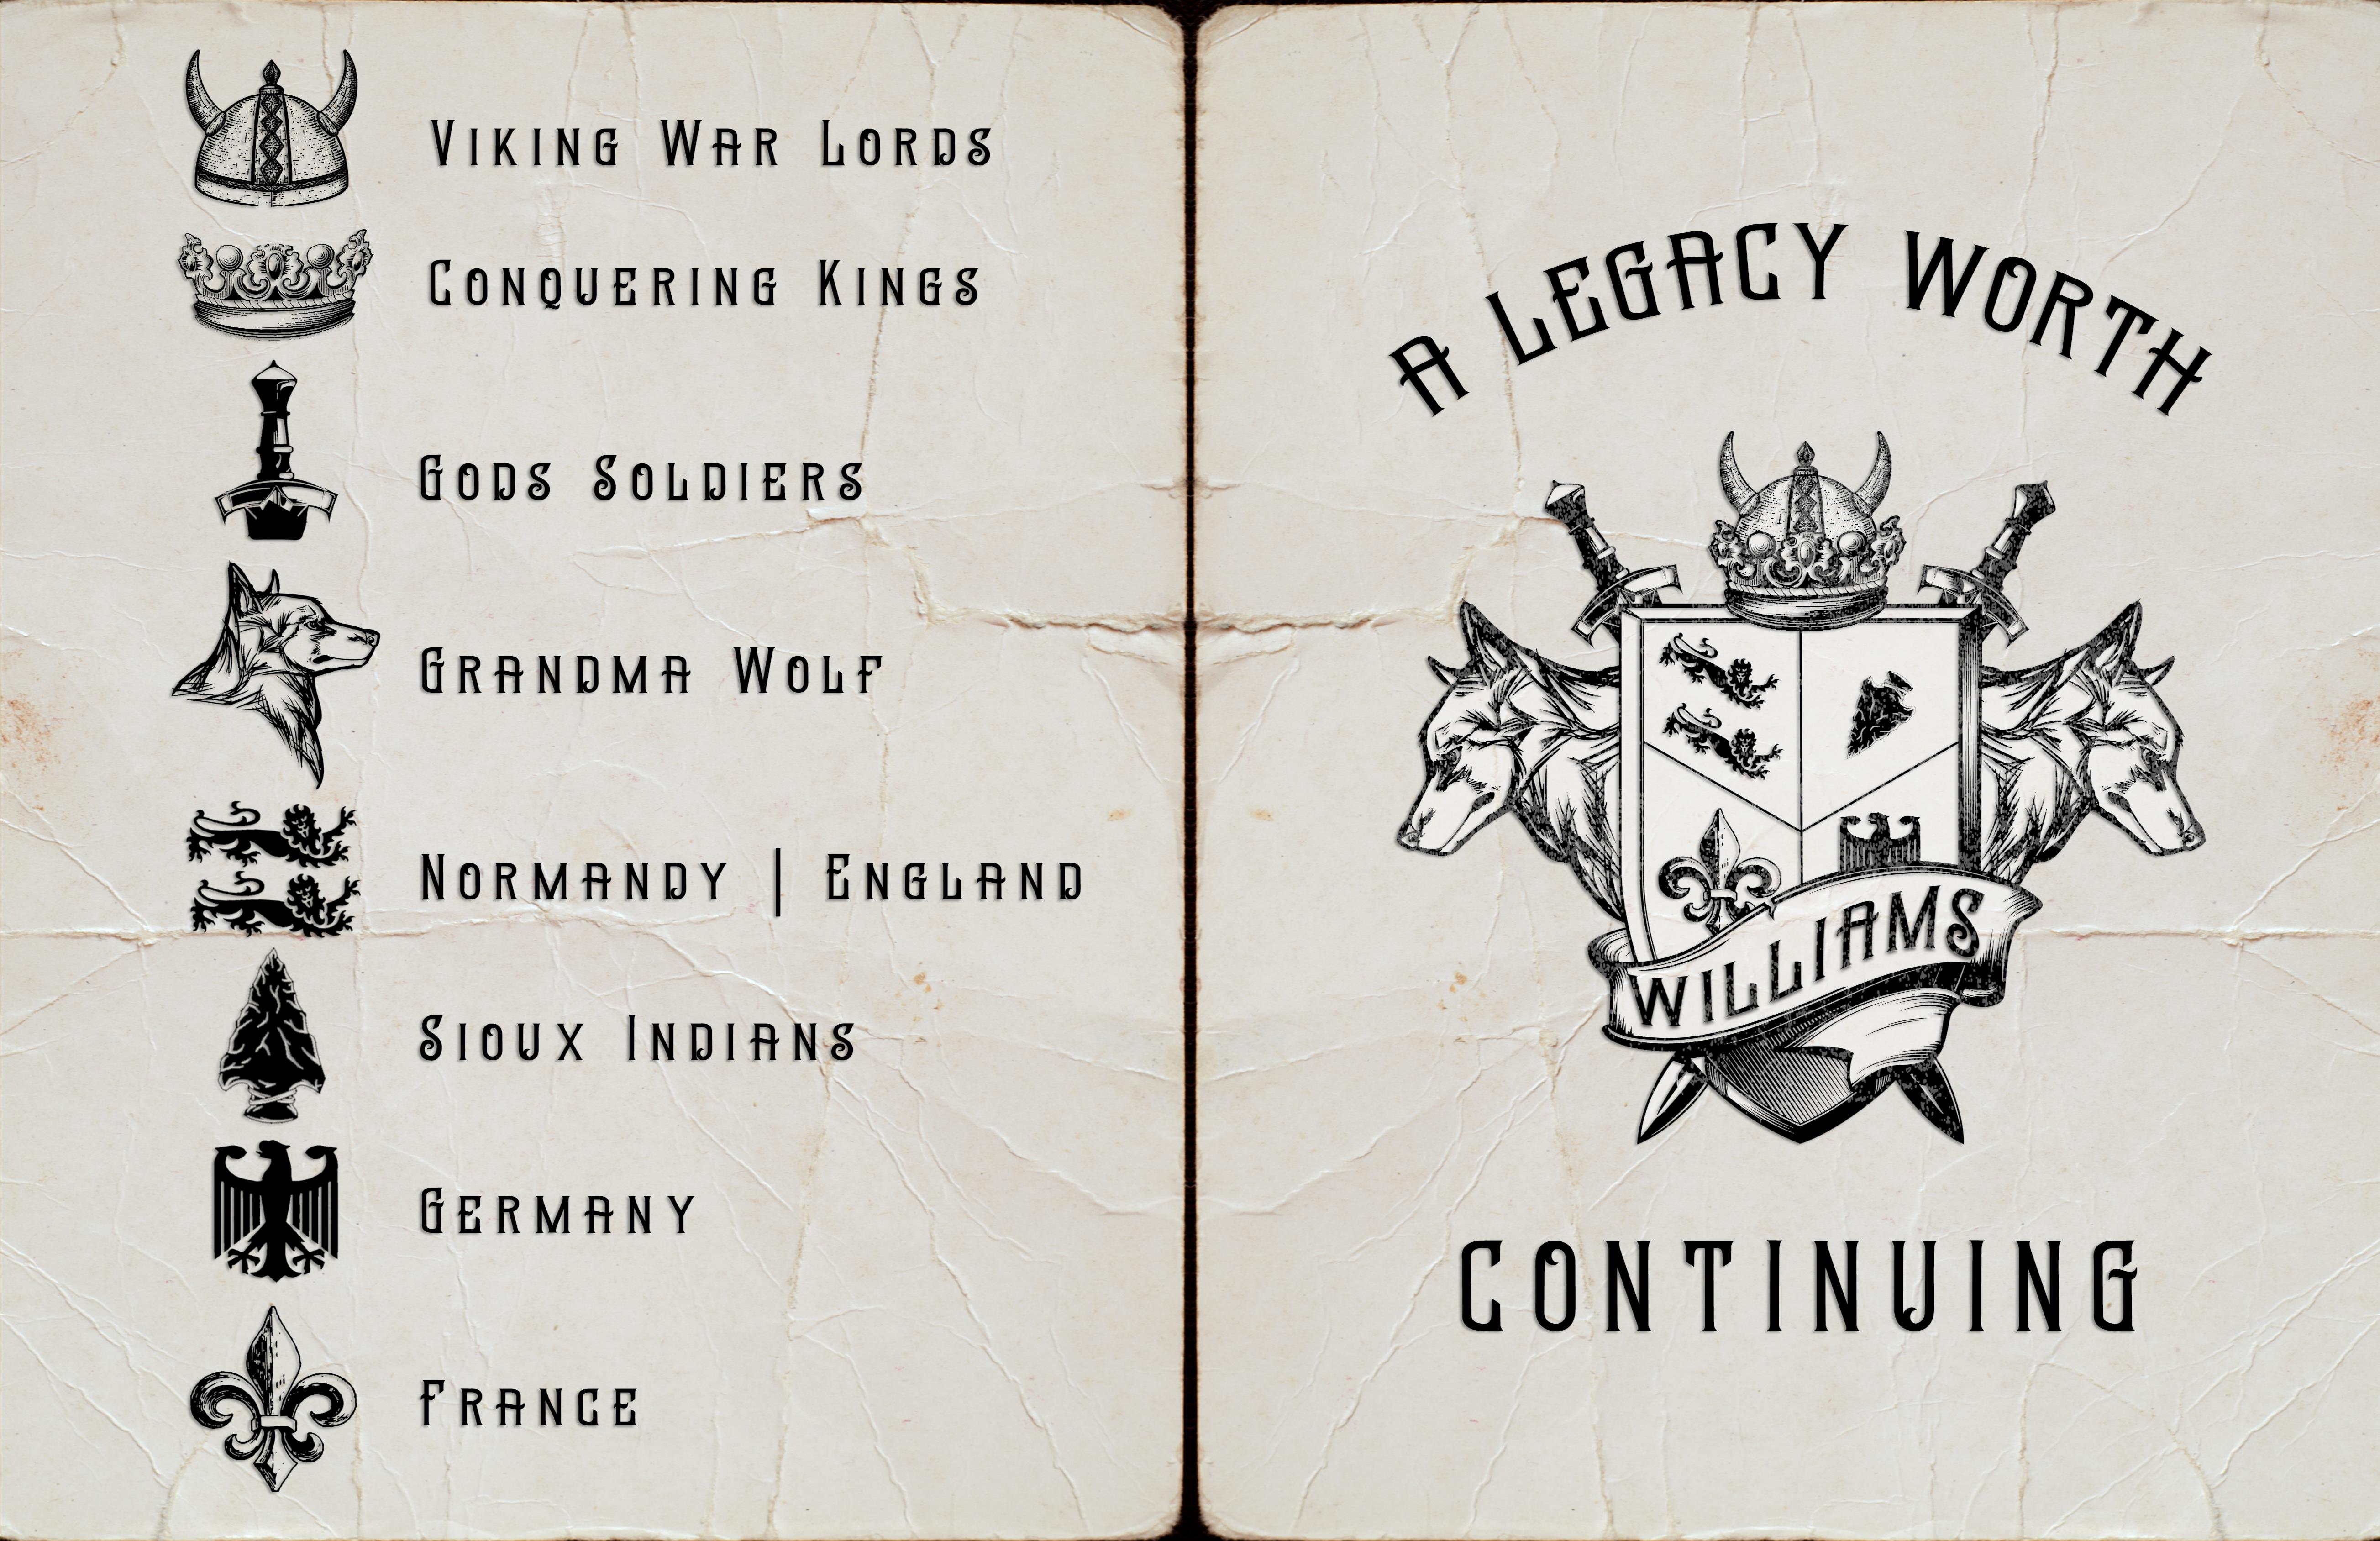 A Legacy Worth Continuing cover image